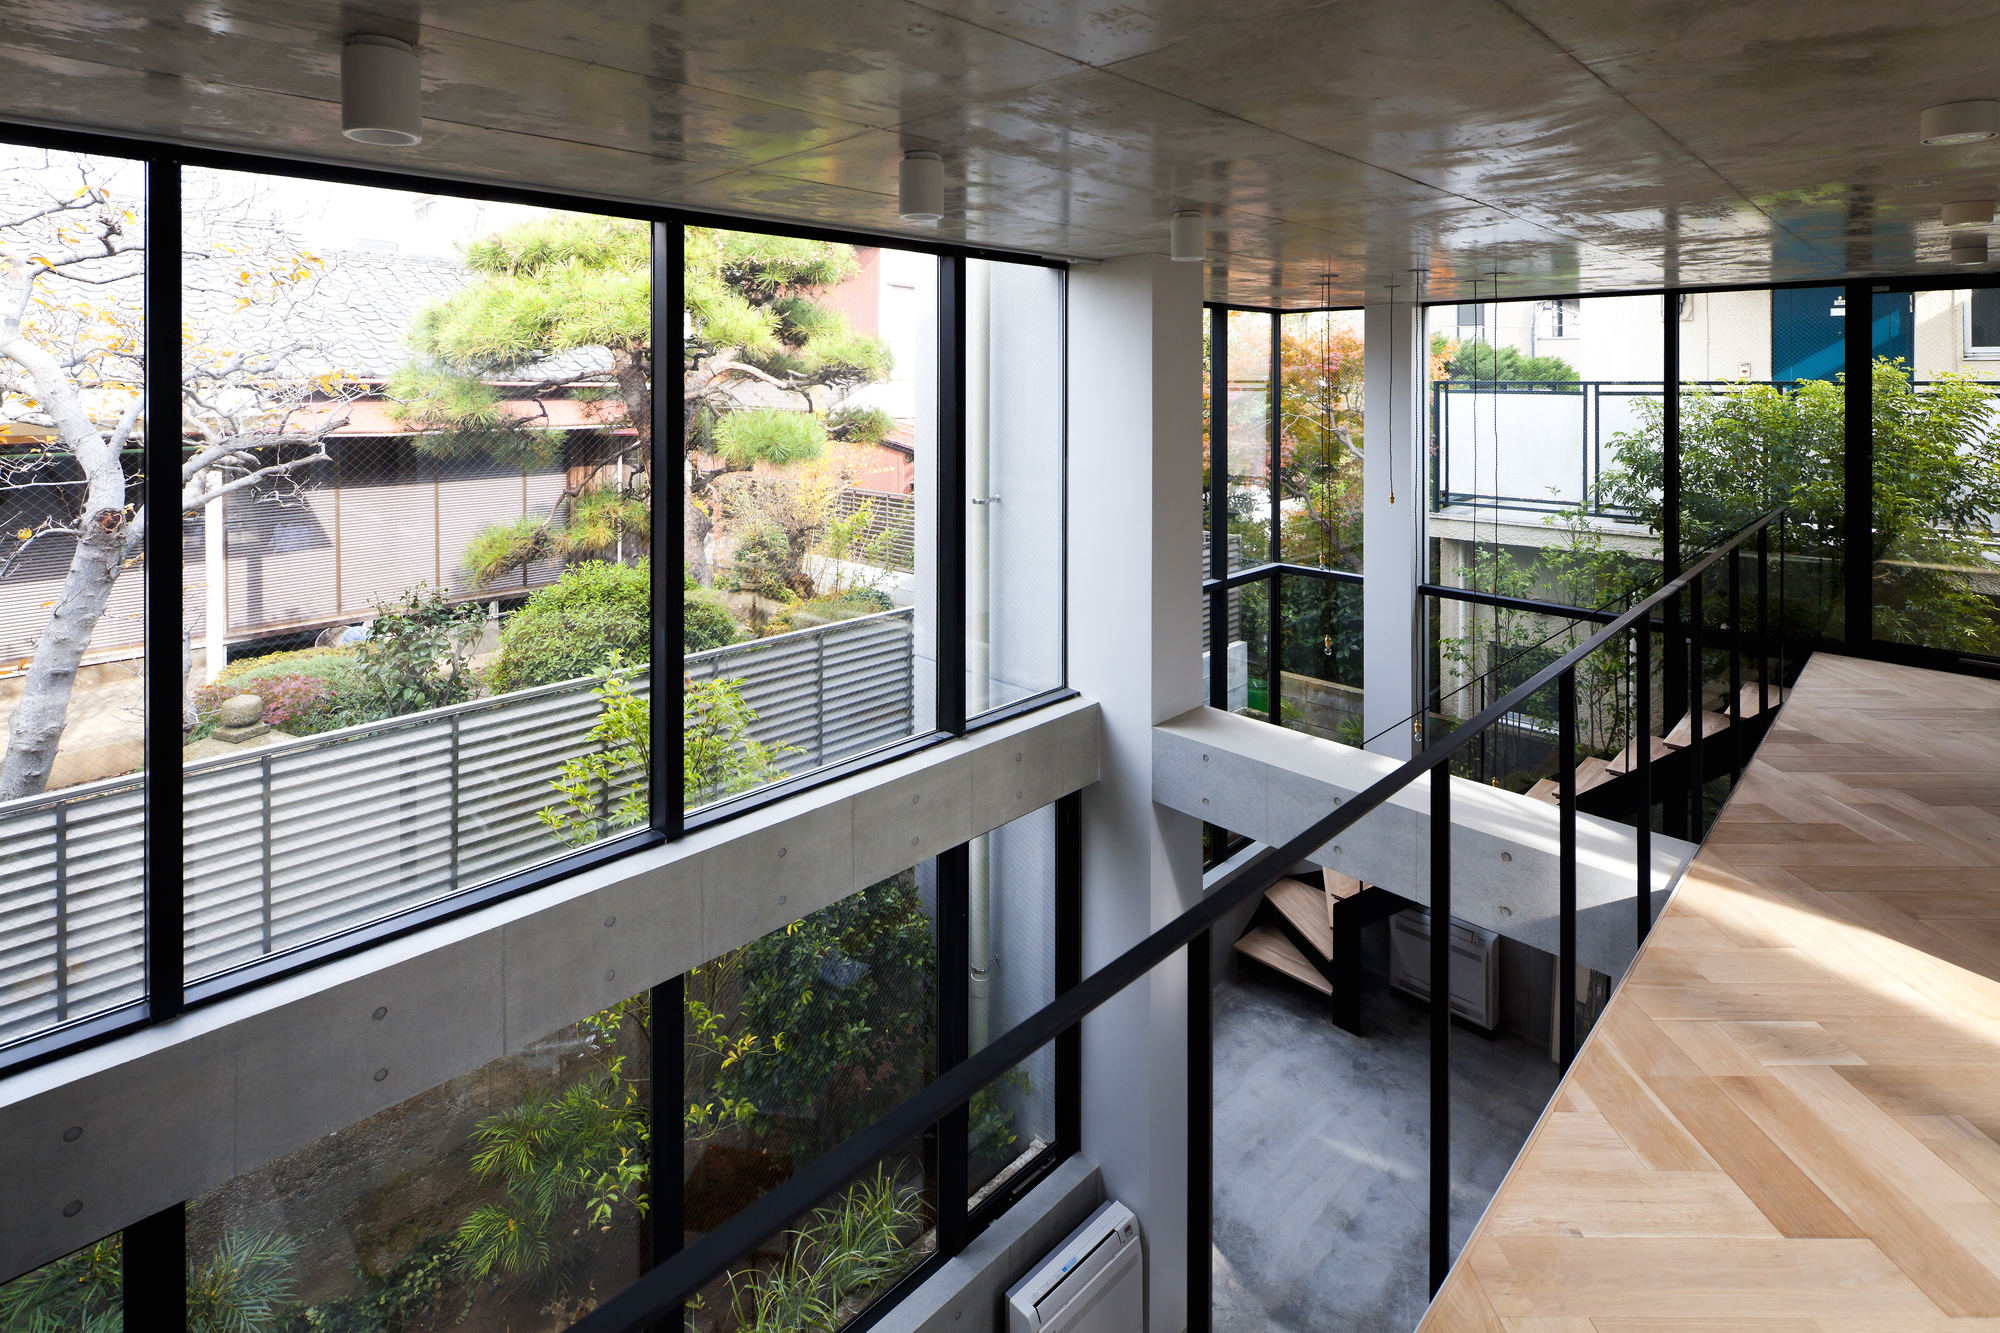 NOIE - Cooperative House by YUUA Architects & Associates